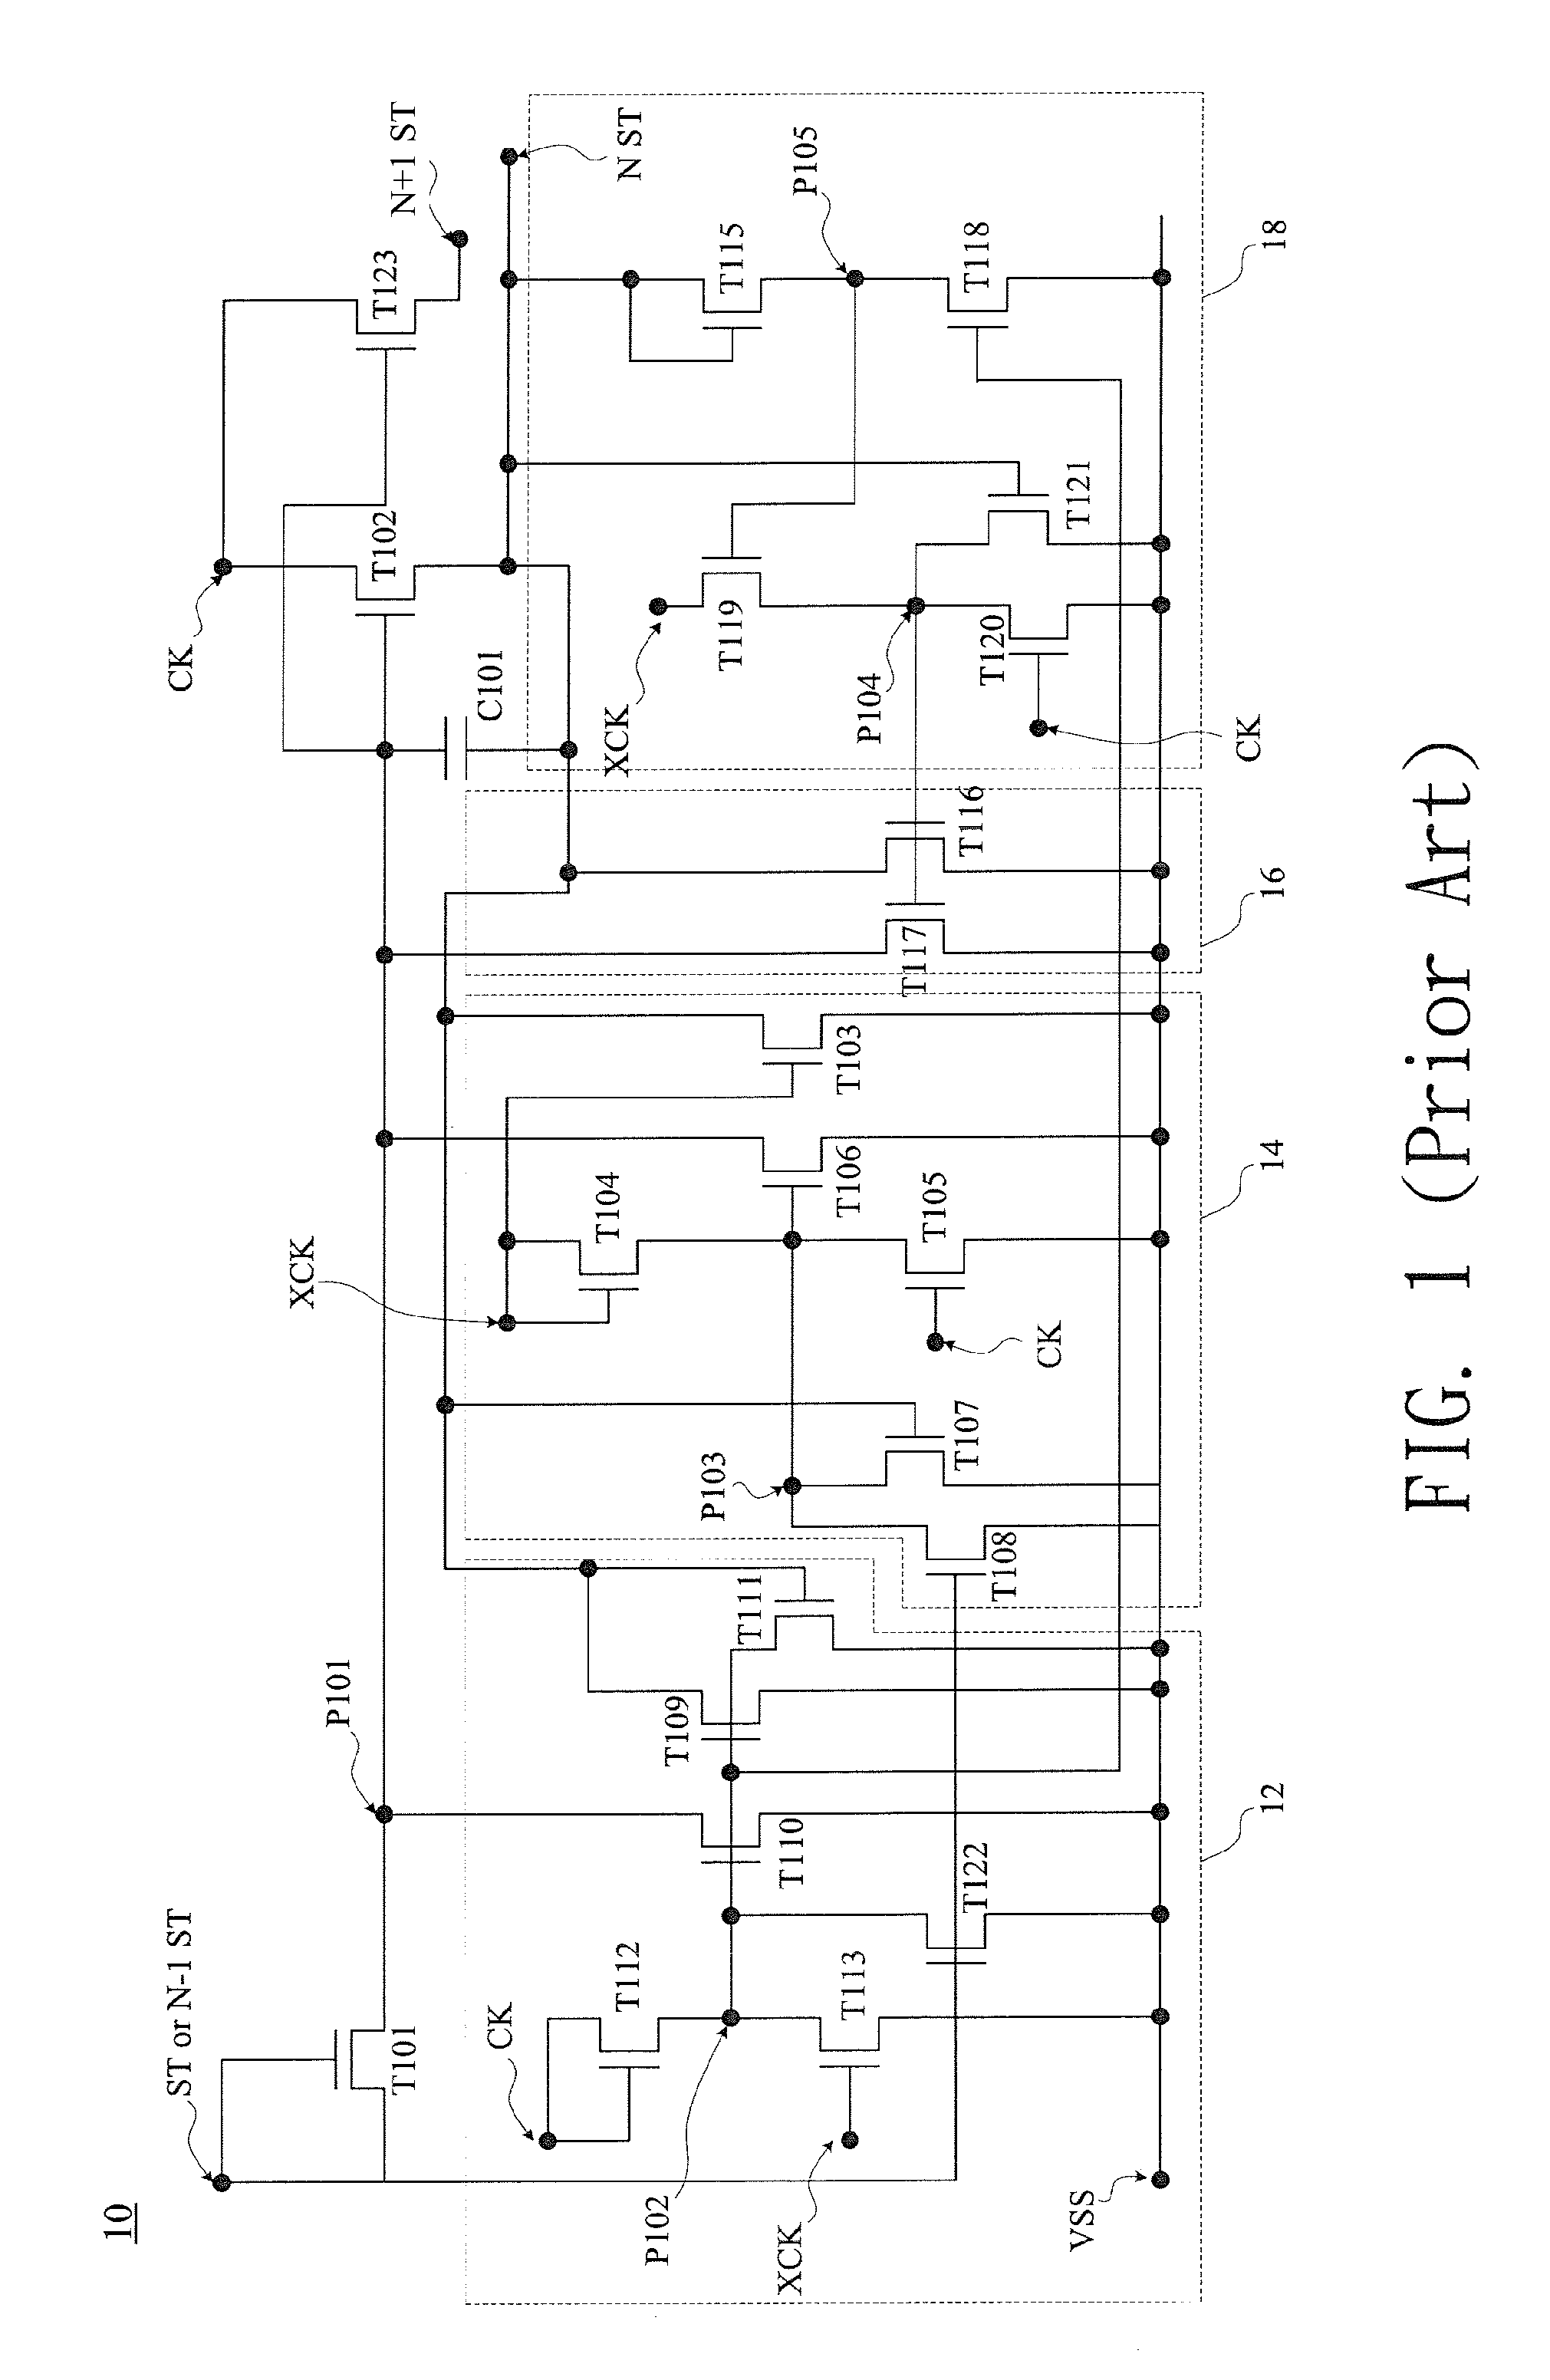 Shift register with individual driving node